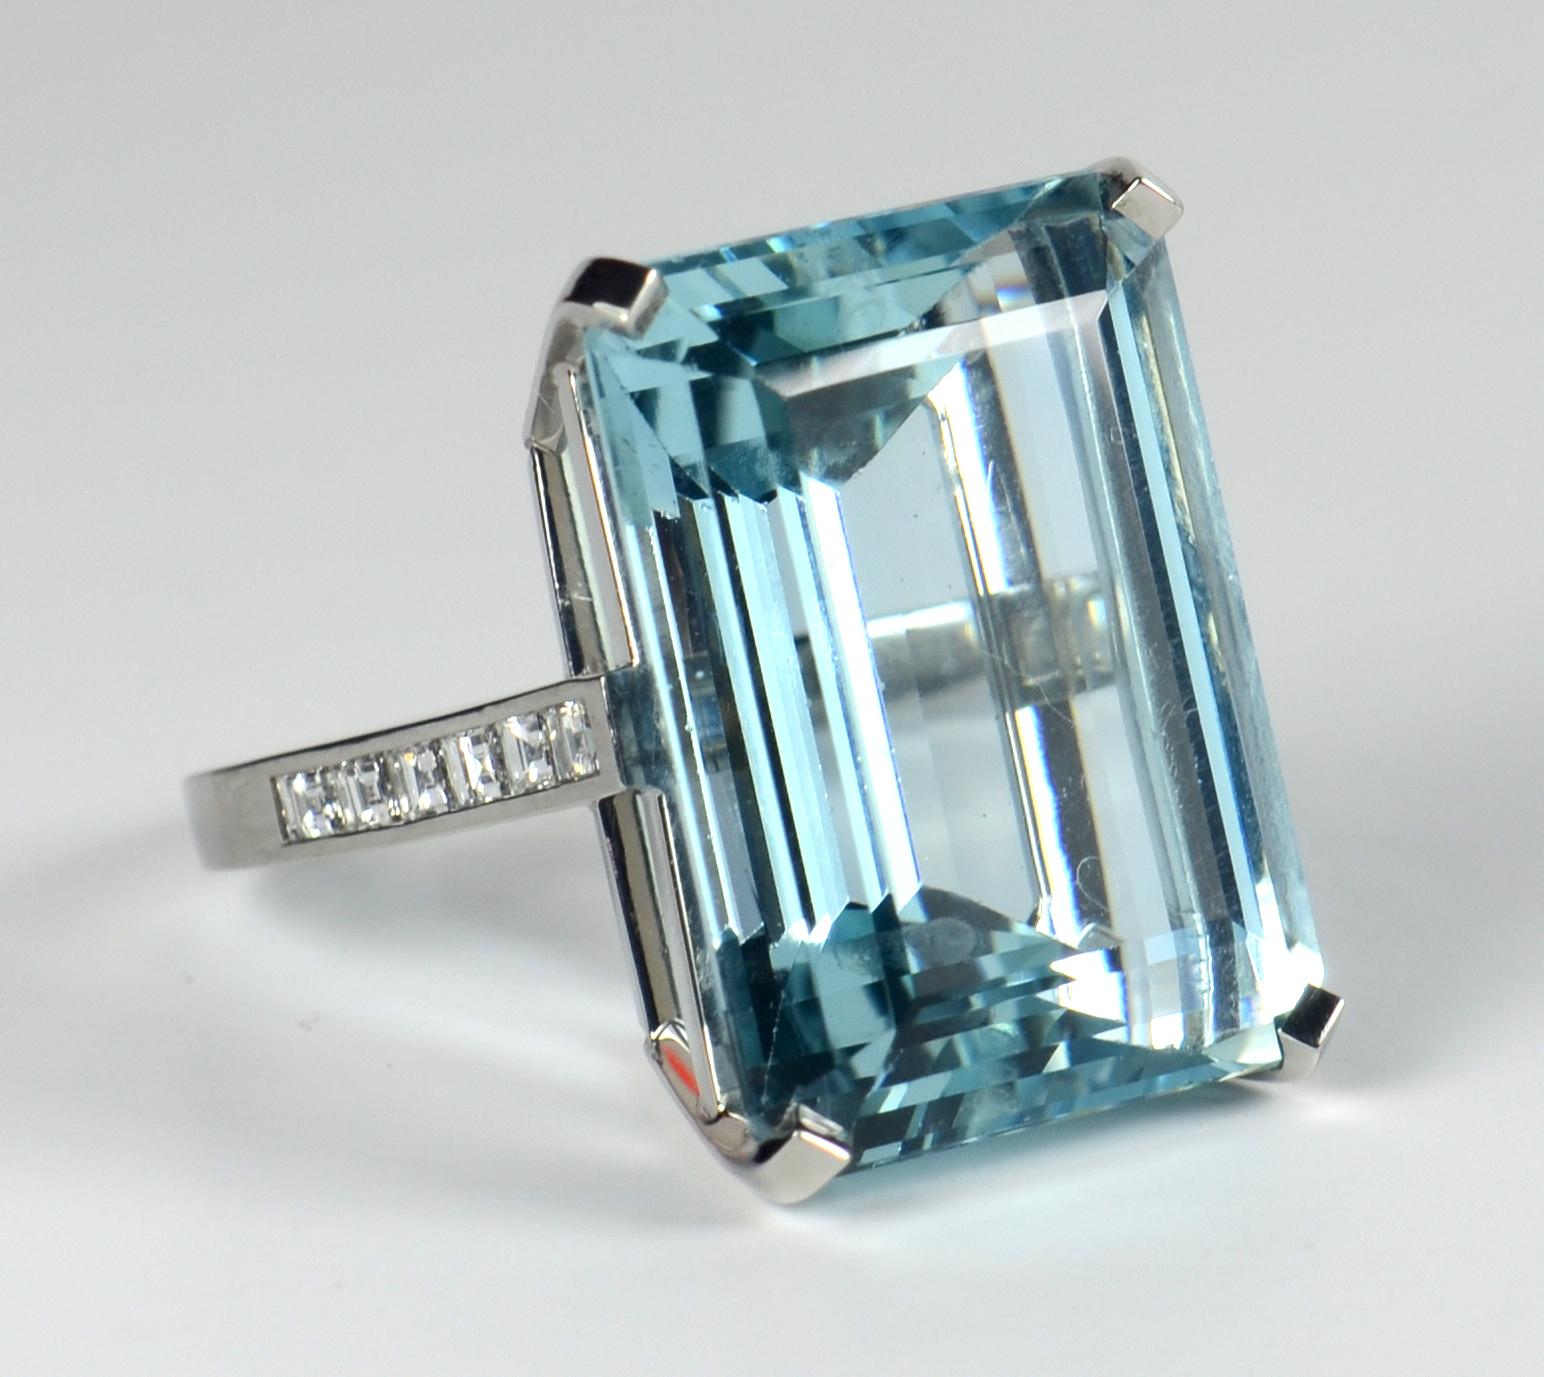 An elegant aquamarine ring with channel-set carré cut diamond shoulders mounted in platinum. The aquamarine is a clean stone with a fine clear blue colour.

The aquamarine measures 22.4 x 17 x 10.8mm and is estimated to weigh 32.70 carats. 
There